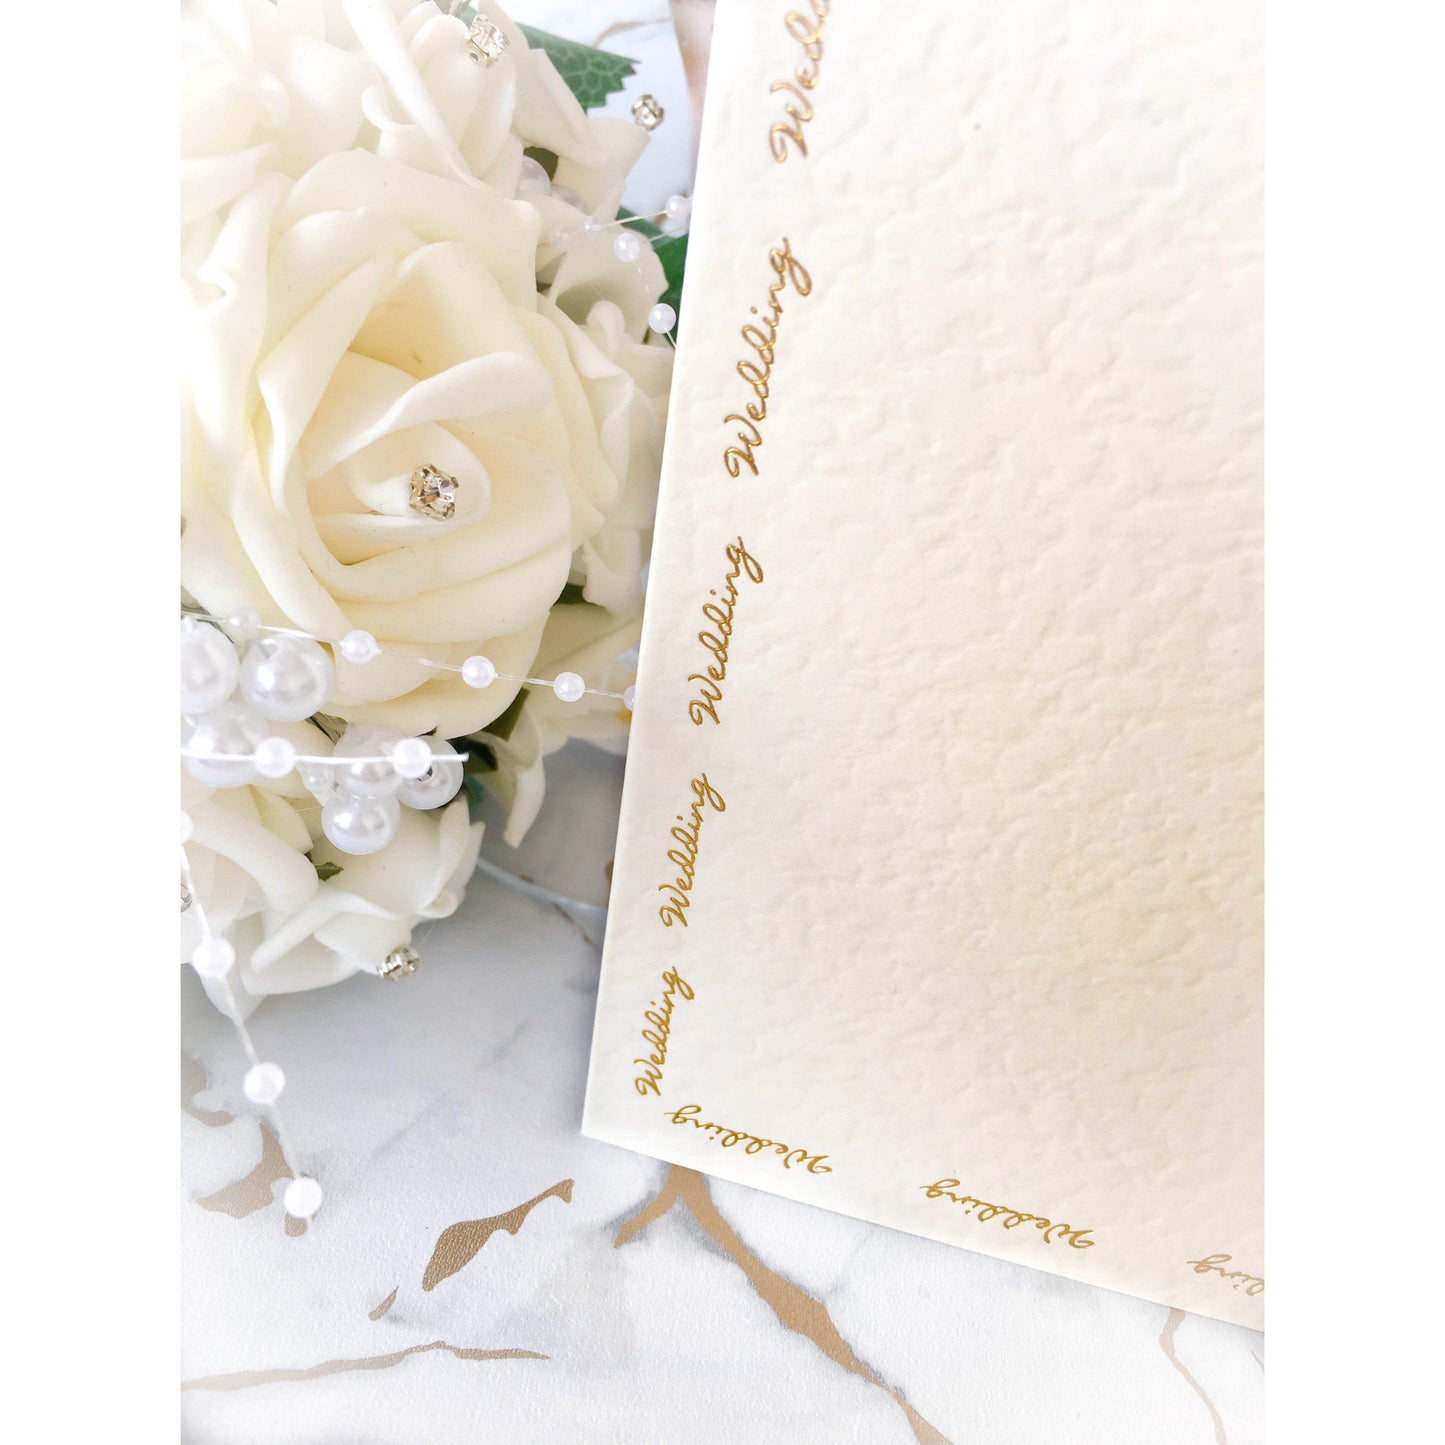 A6 Card Blanks White Hammer Effect With Silver Foil Wedding Script 10pk With Envelopes- Clearance-The Creative Bride